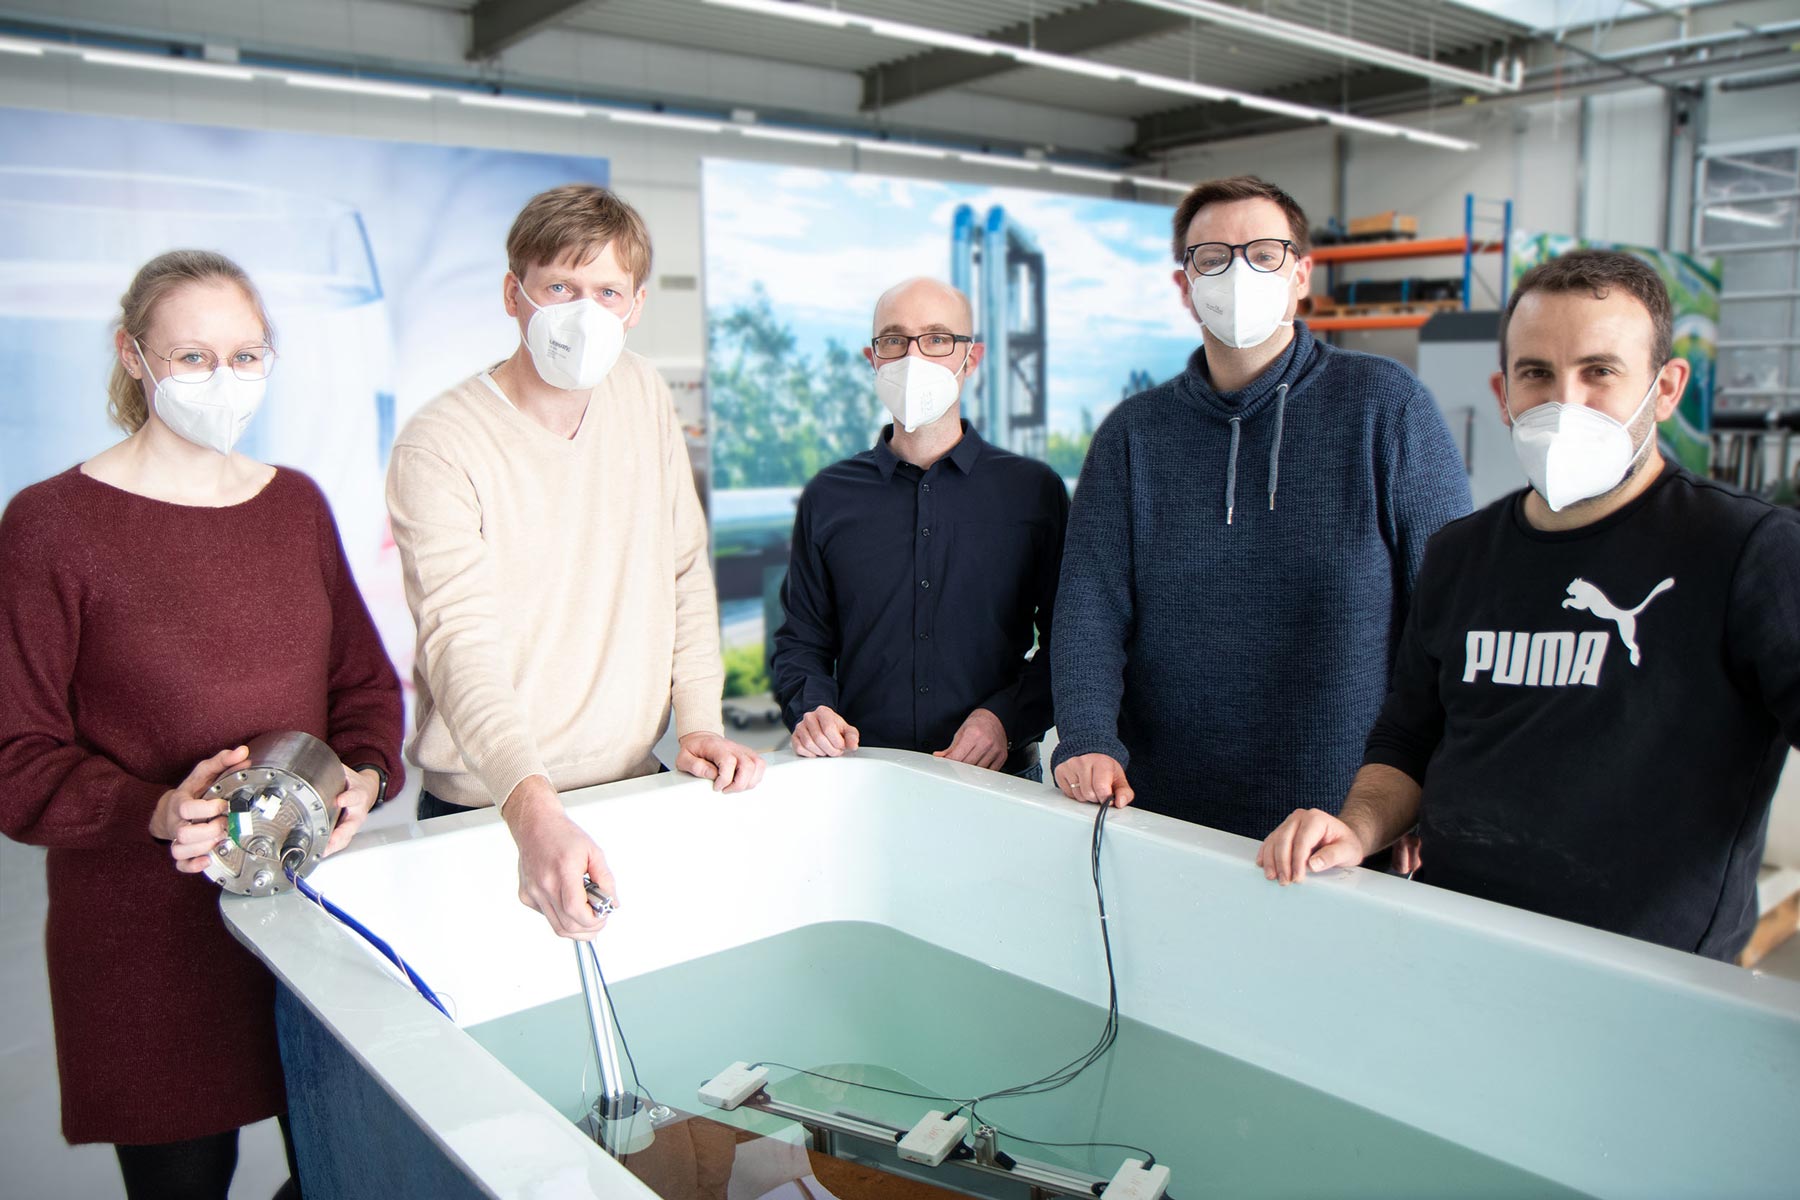 ROSEN Group in Lingen delivers measurement technologies for million-Euro research project "Mare-IT".